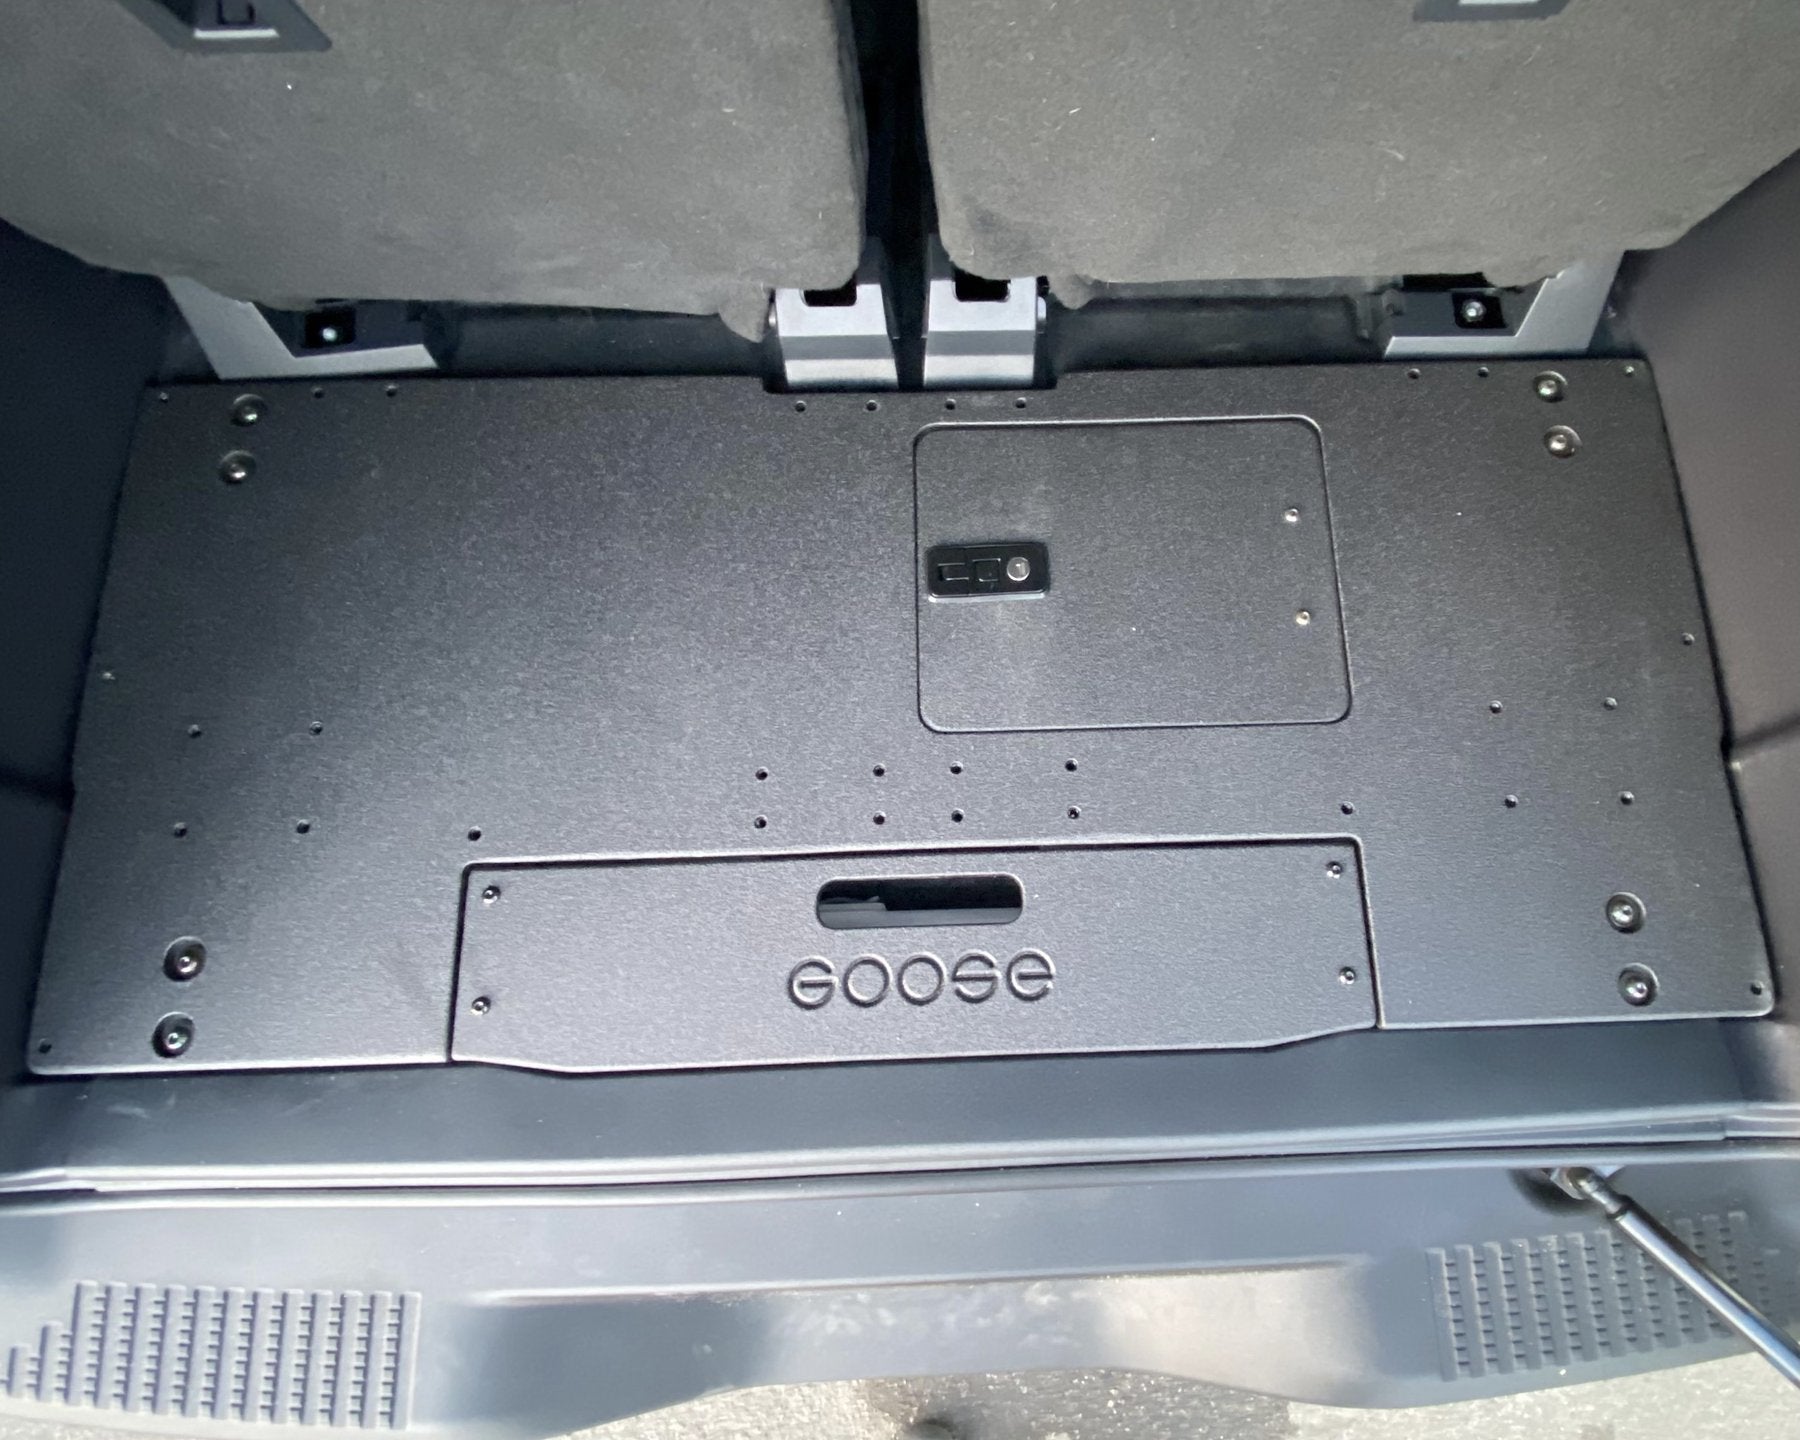 '21-23 Ford Bronco 2 Door Rear Plate System Goose Gear display